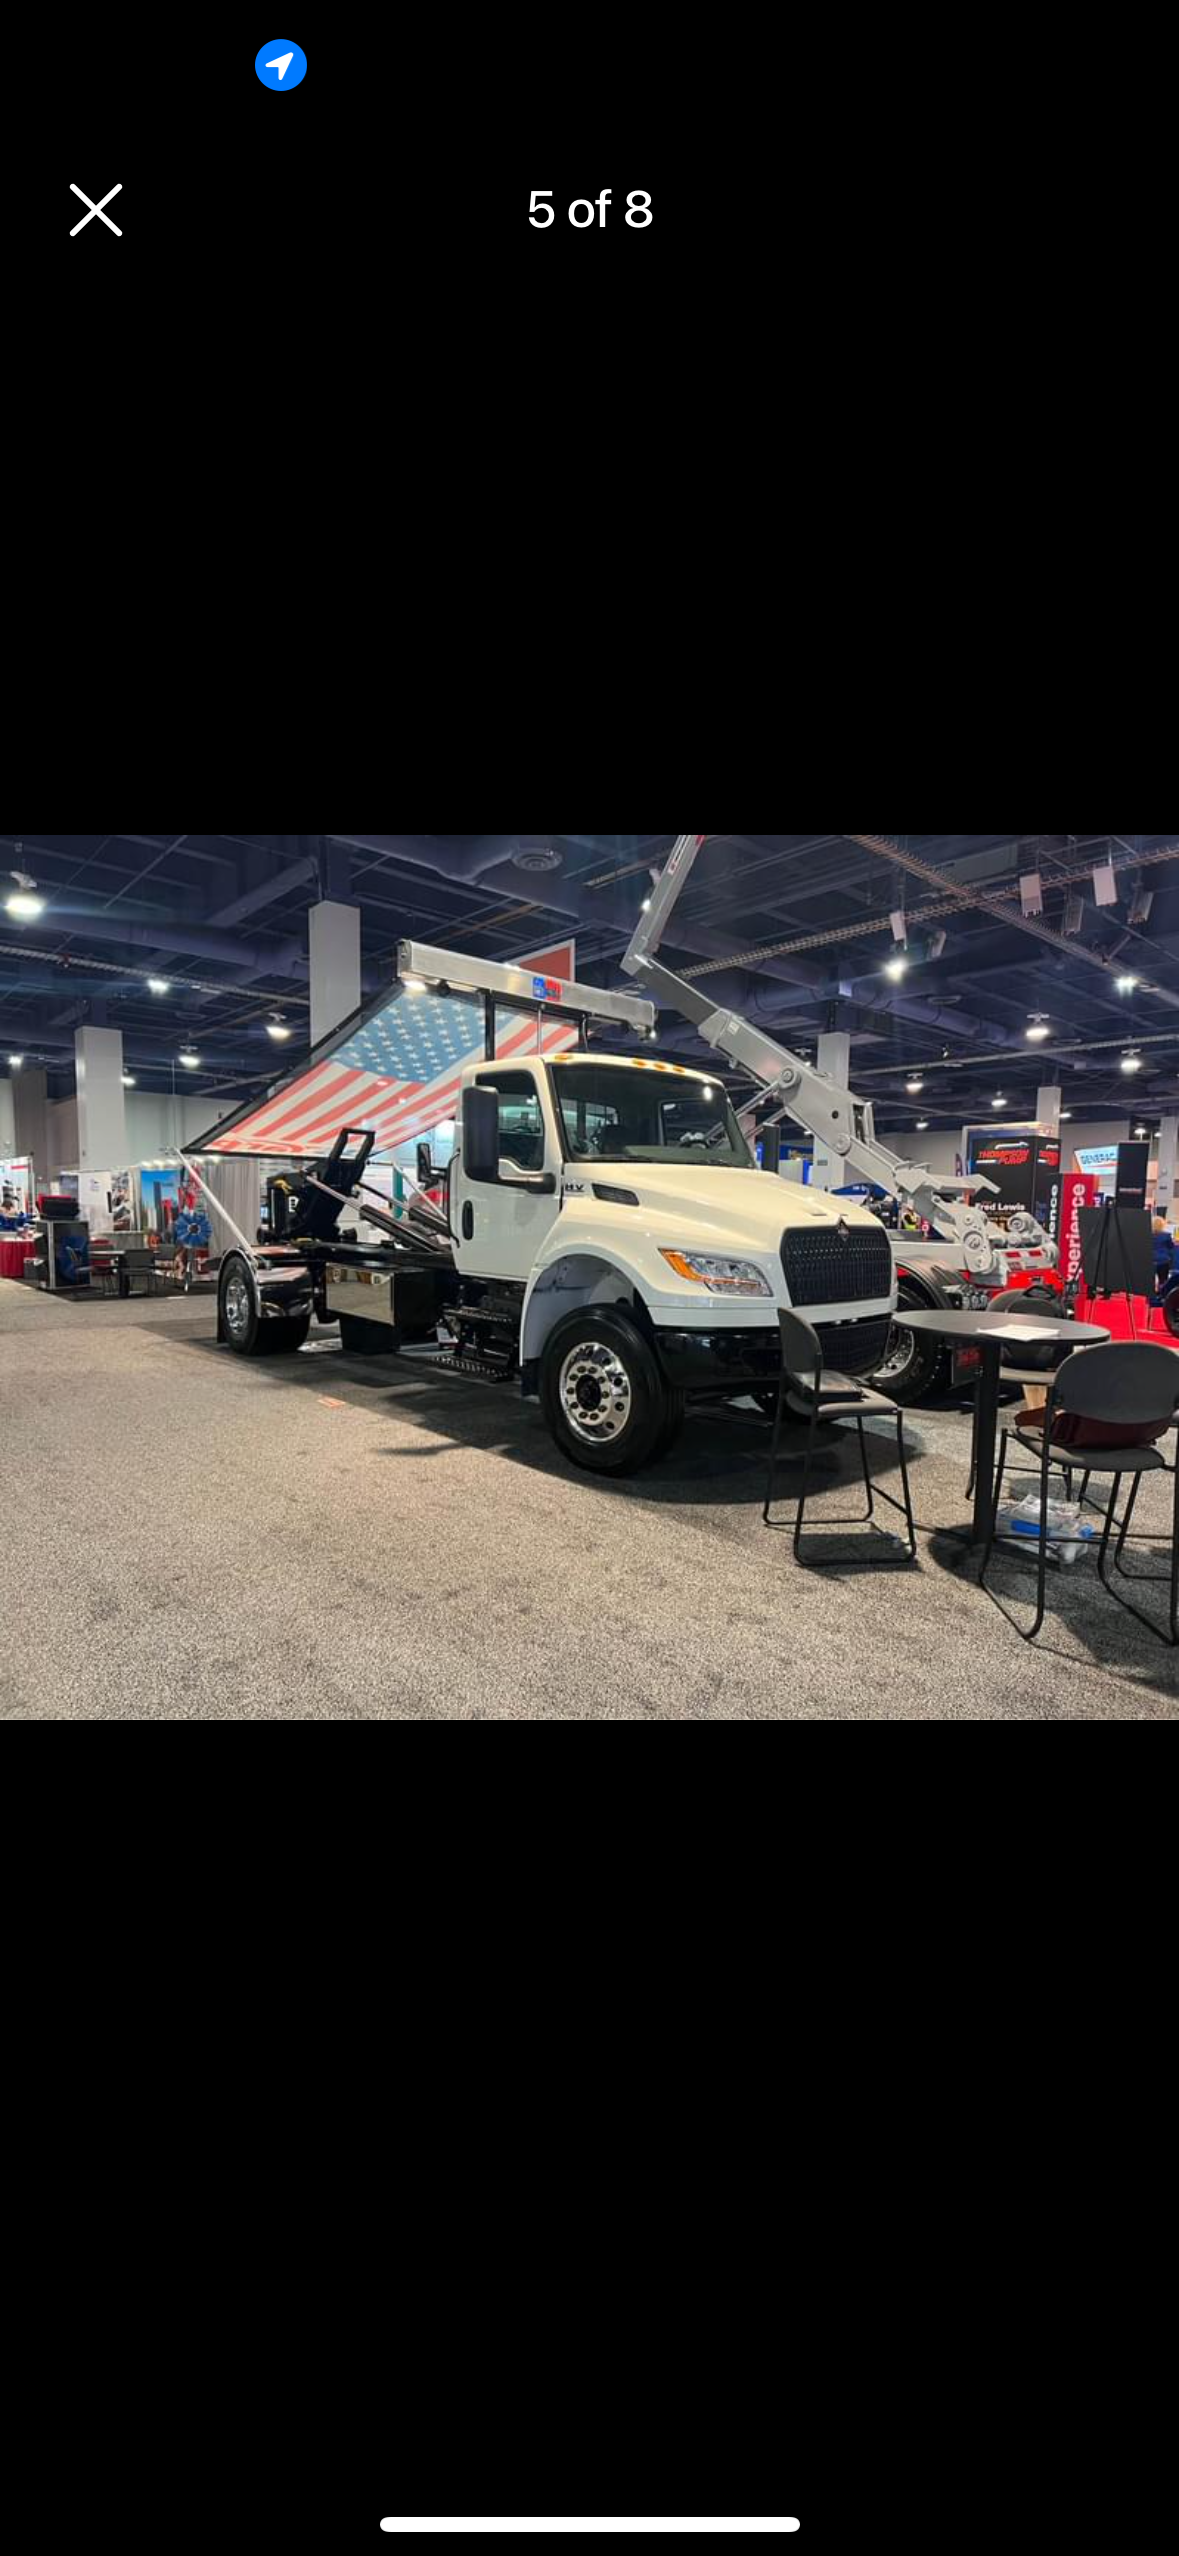 A tow truck is parked in a room at a truck show.